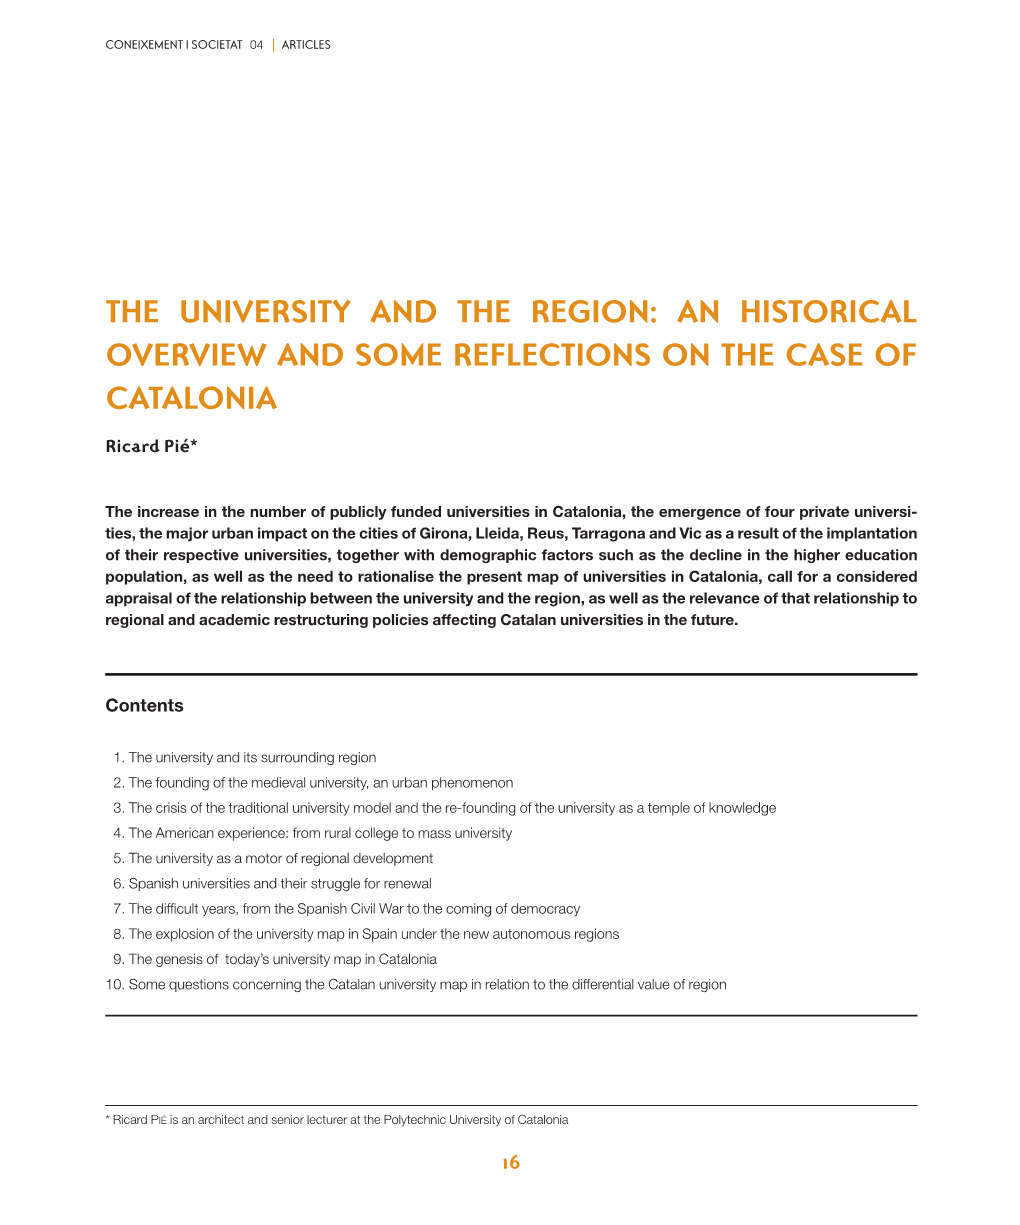 The University and the Region: an Historical Overview and Some Reflections on the Case of Catalonia